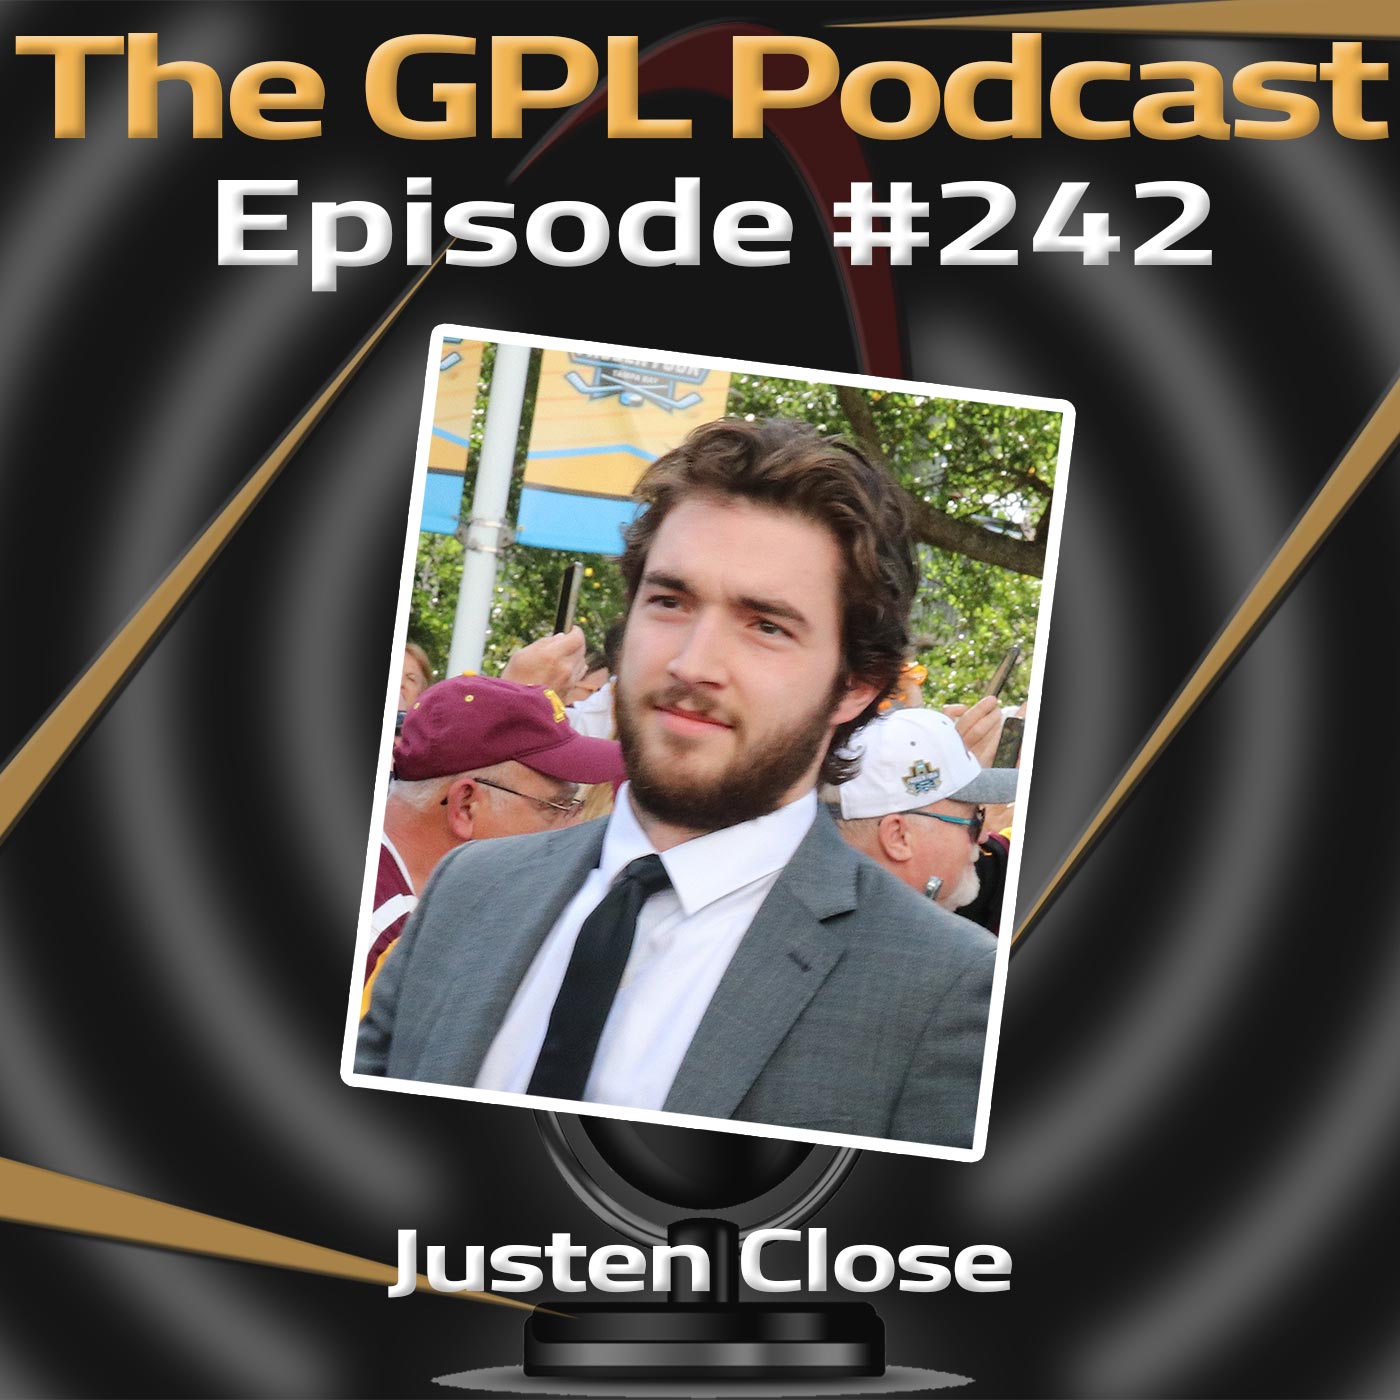 GPL Podcast #242: Gopher goalie Justen Close joins the podcast